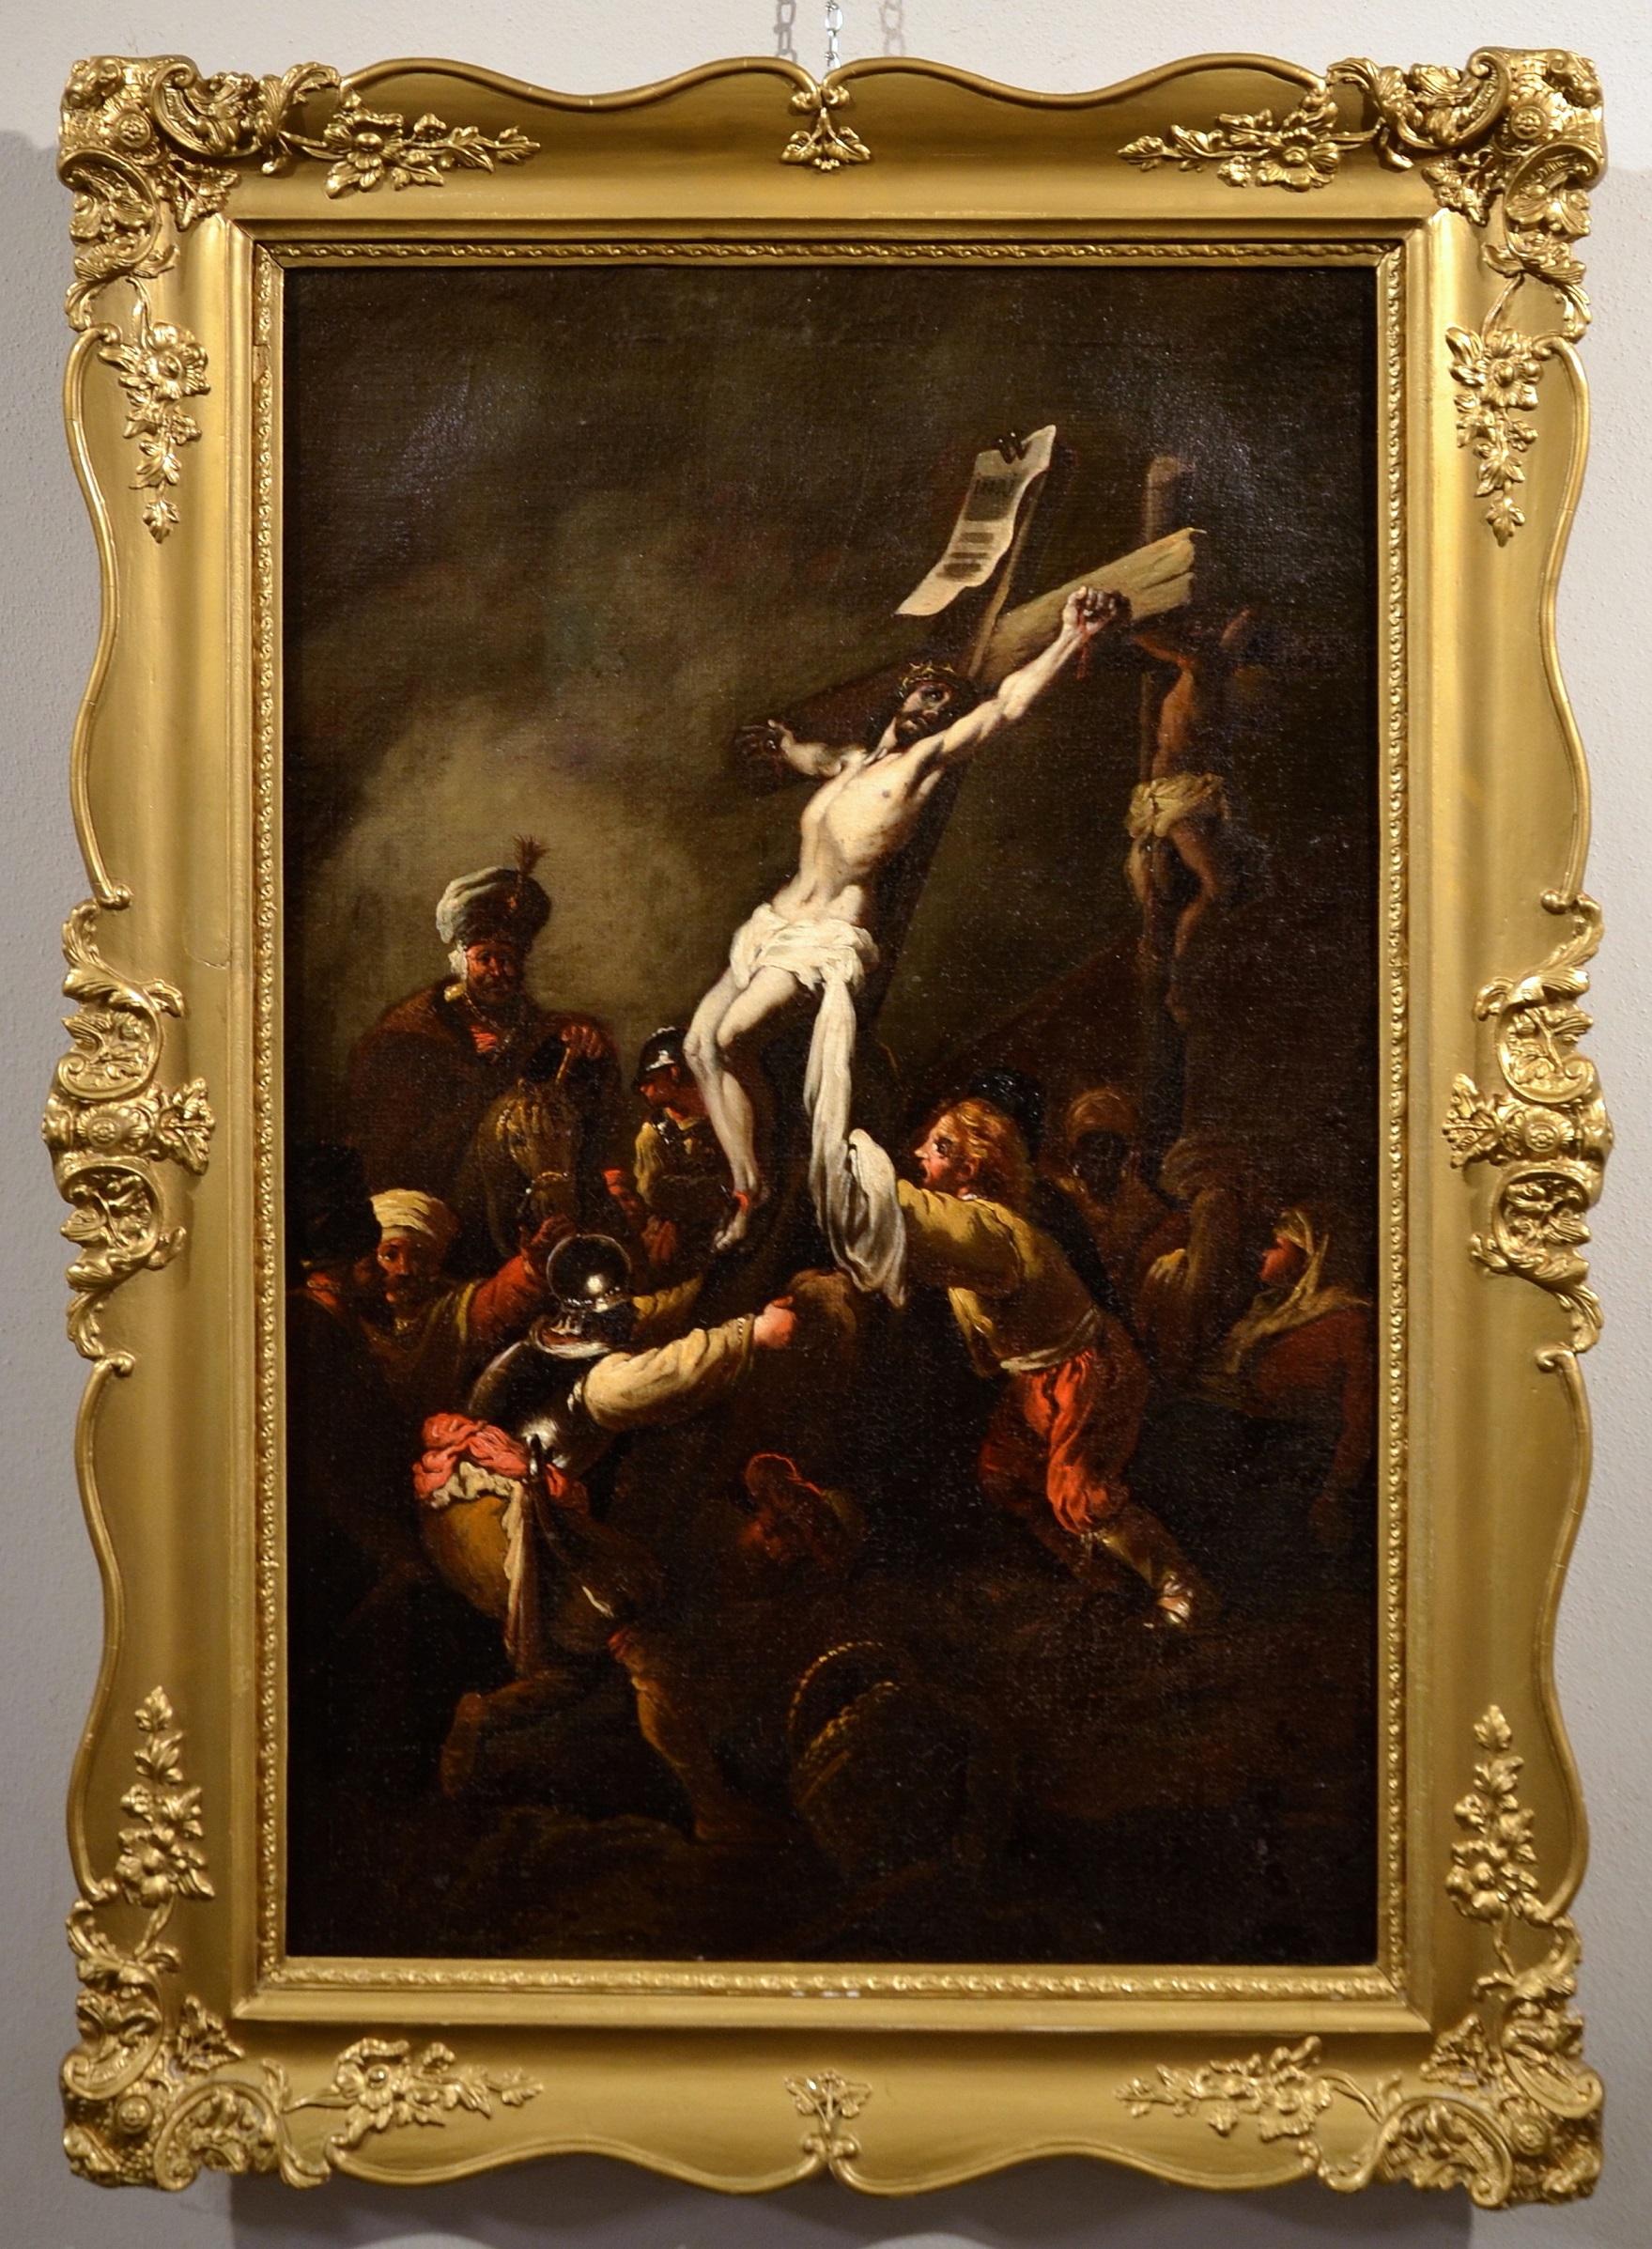 Cross Oil on canvas Paint 17th Century Rembrandt Baroque Jesus Art Quality  - Painting by Circle of Rembrandt van Rijn (Leiden 1606 - Amsterdam 1669)